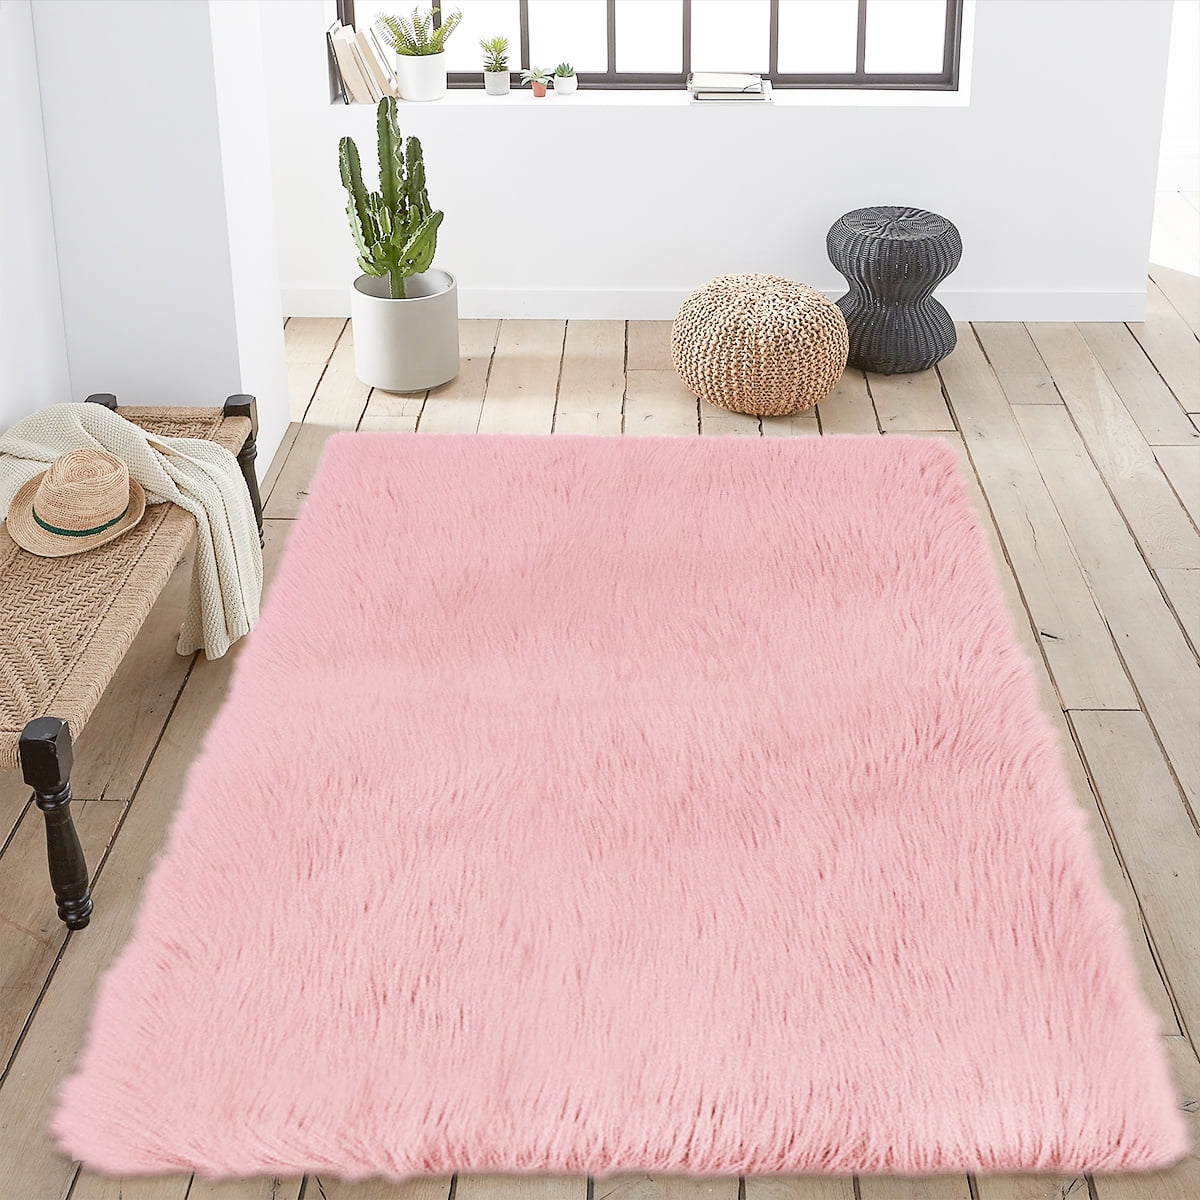 NEW THICK SILKY SOFT SHAGGY RUG MODERN DESIGN BLUSH ROSE PINK CONTEMPORARY RUGS 